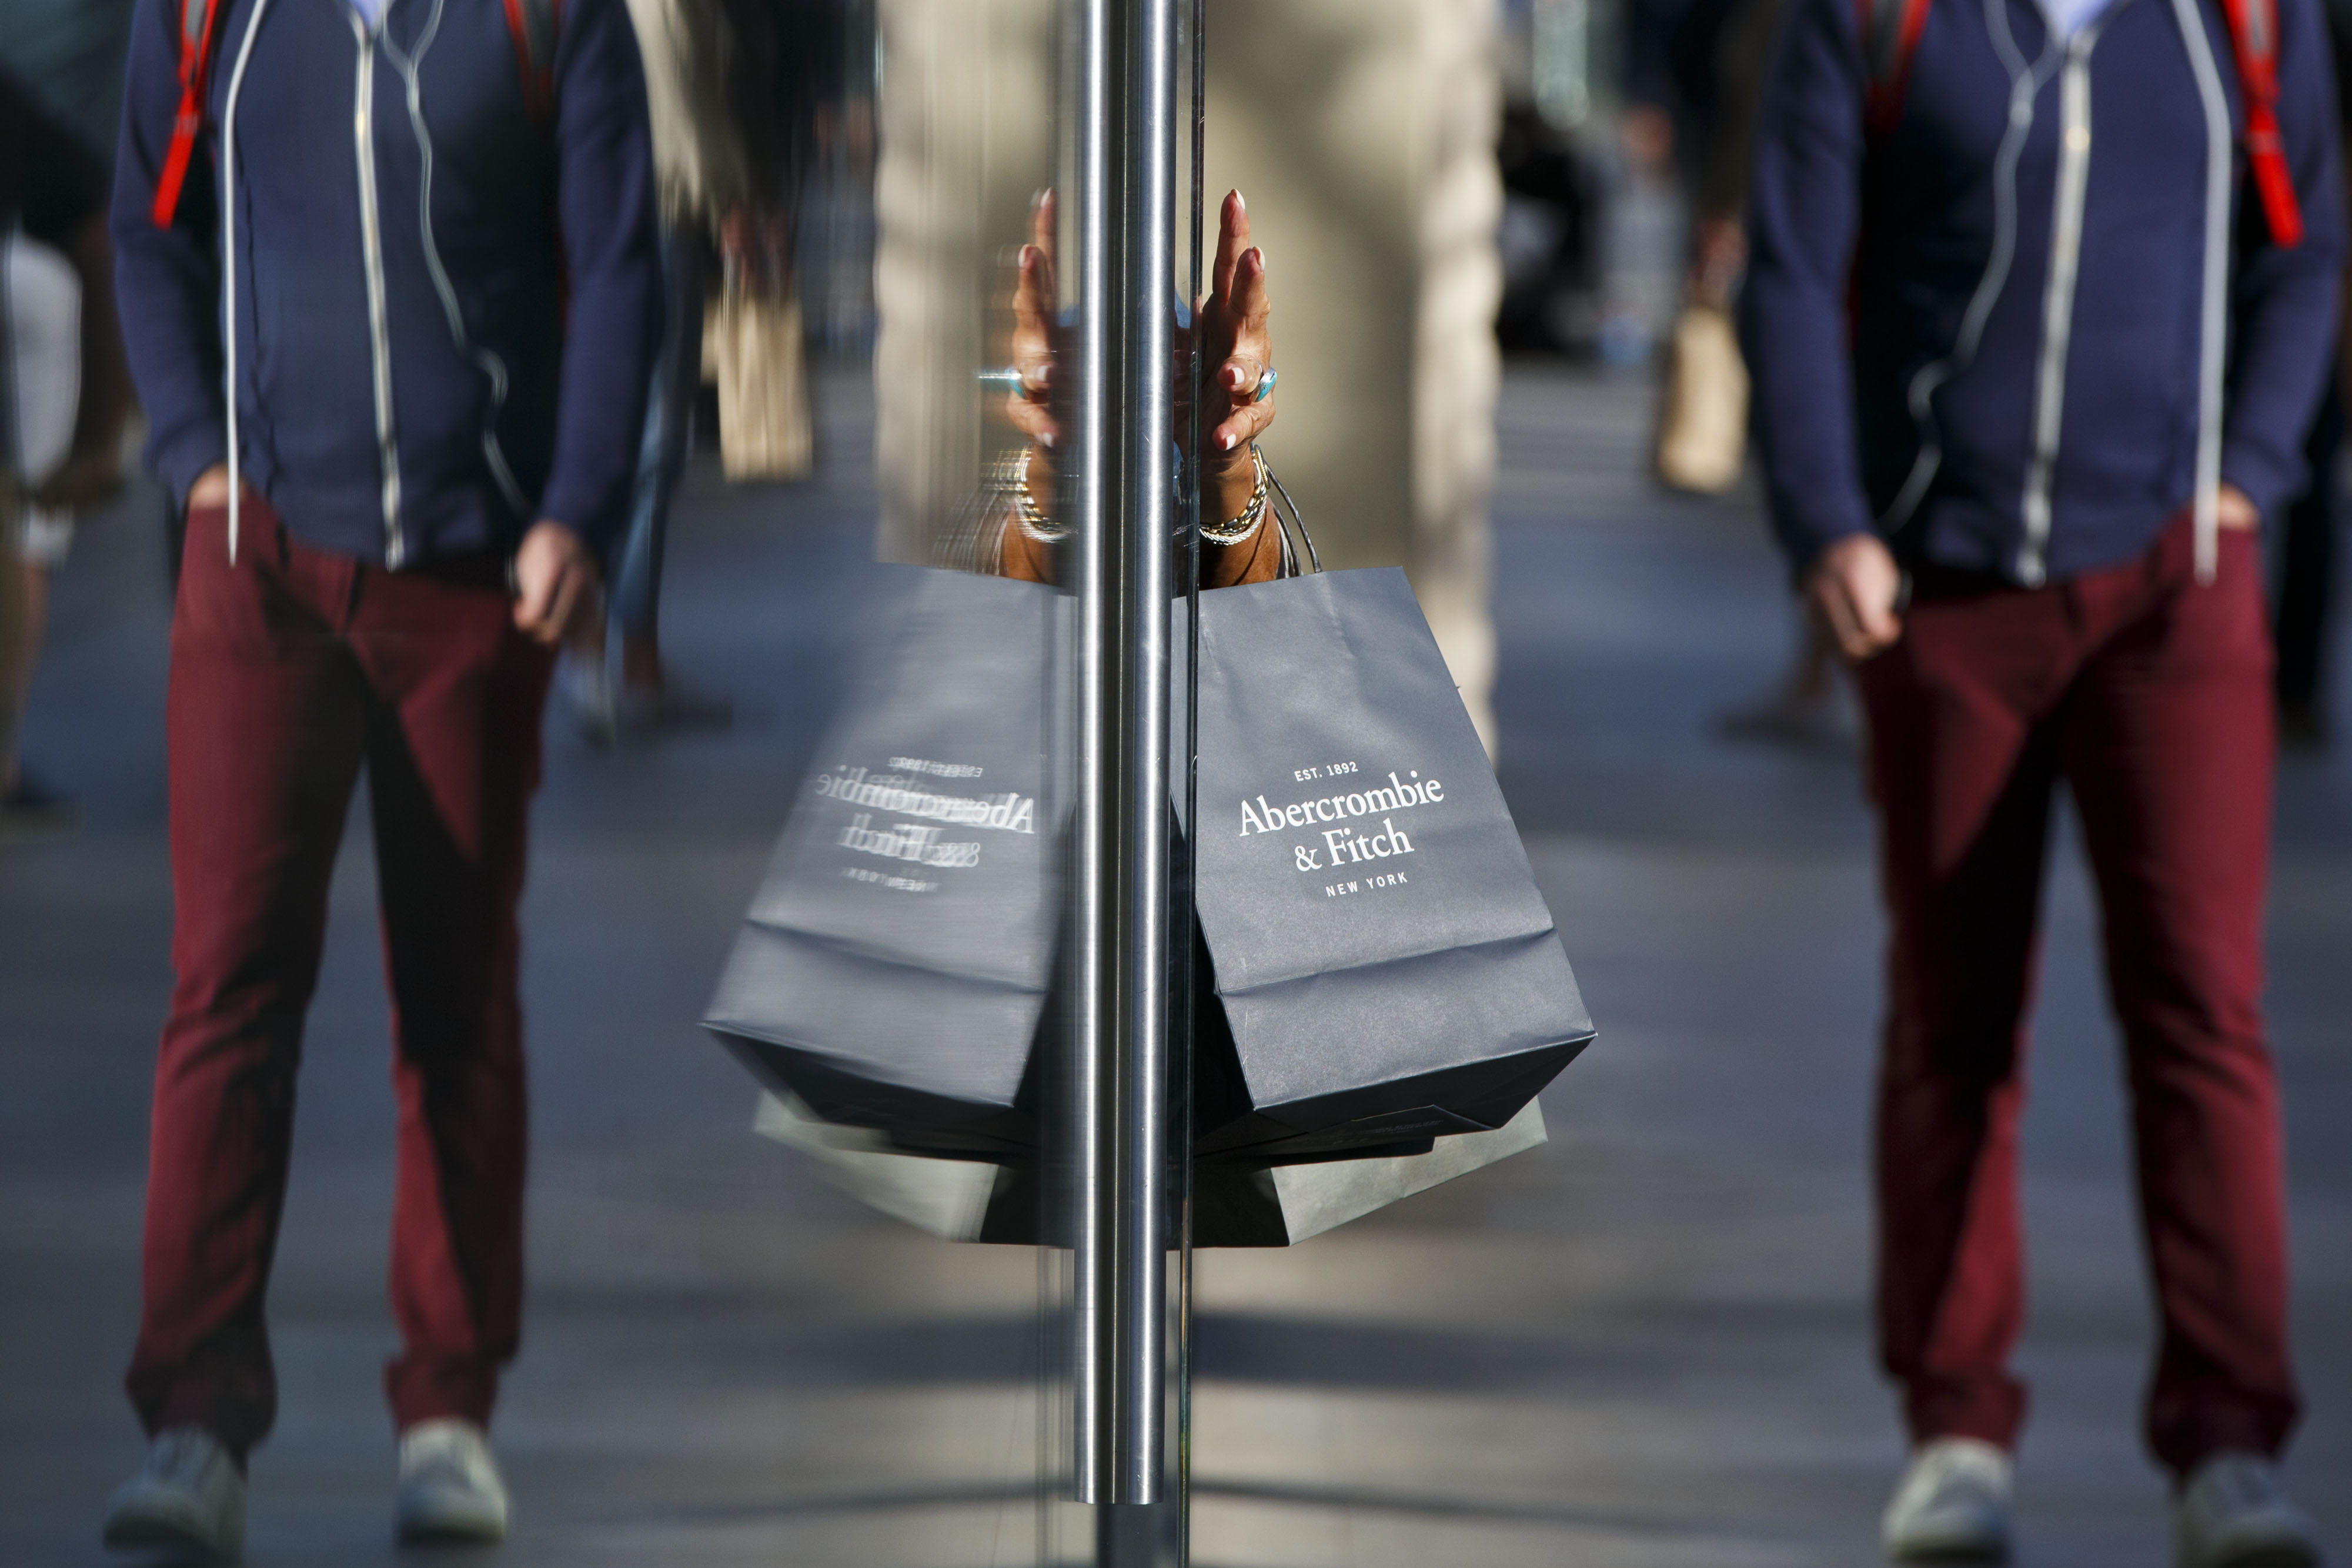 Deal of the Week: Abercrombie & Fitch Seeks Savior - Bloomberg